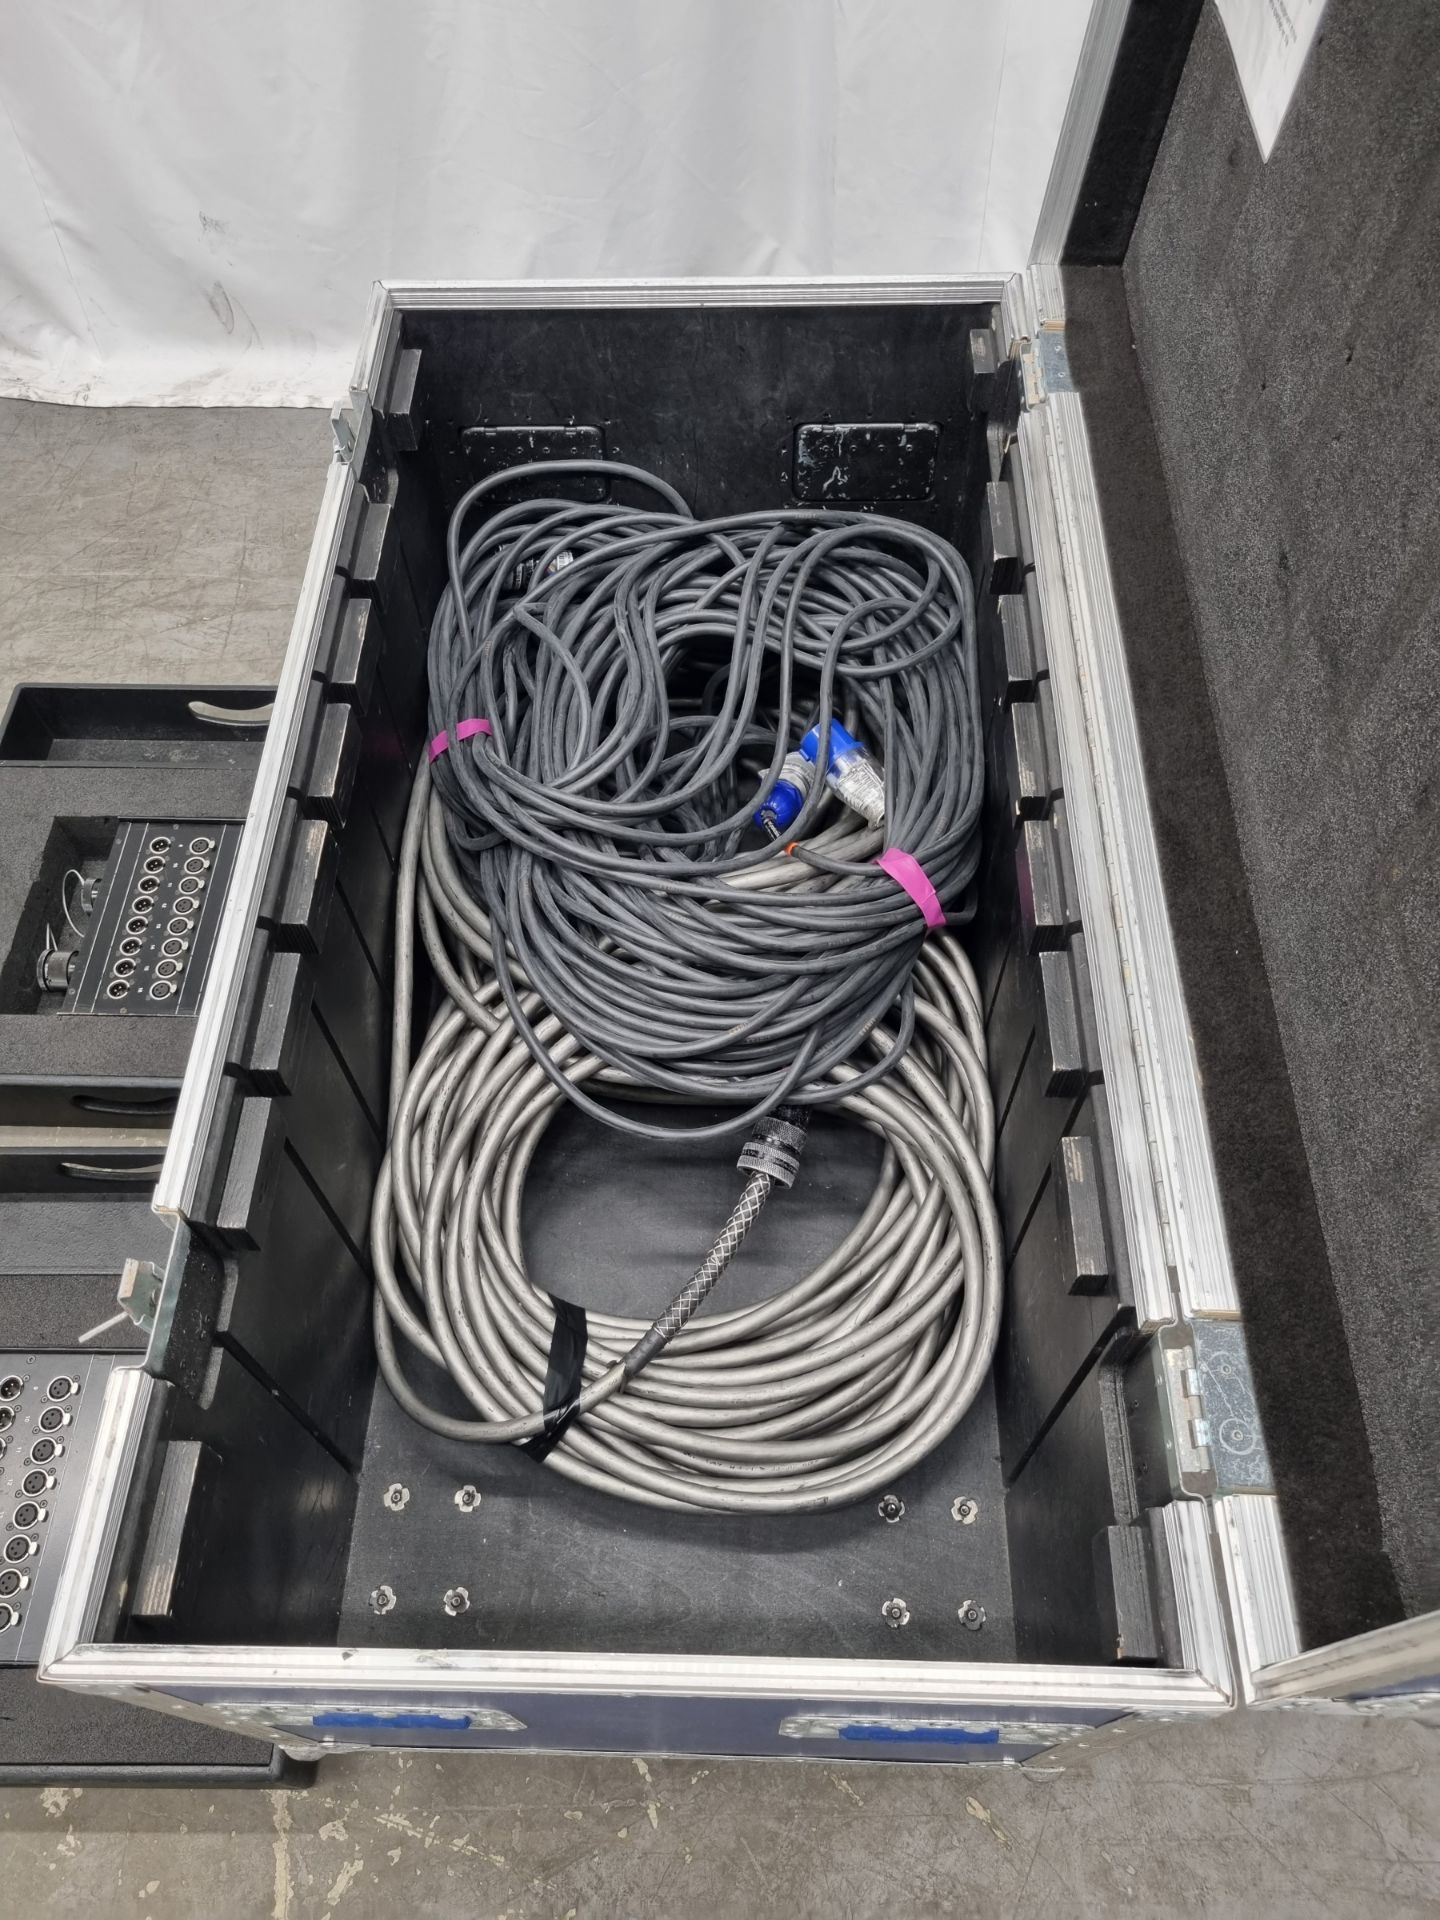 2x 16 input and output XLR stageboxes with multicore loom and mains cable in flight case on wheels - Image 6 of 8